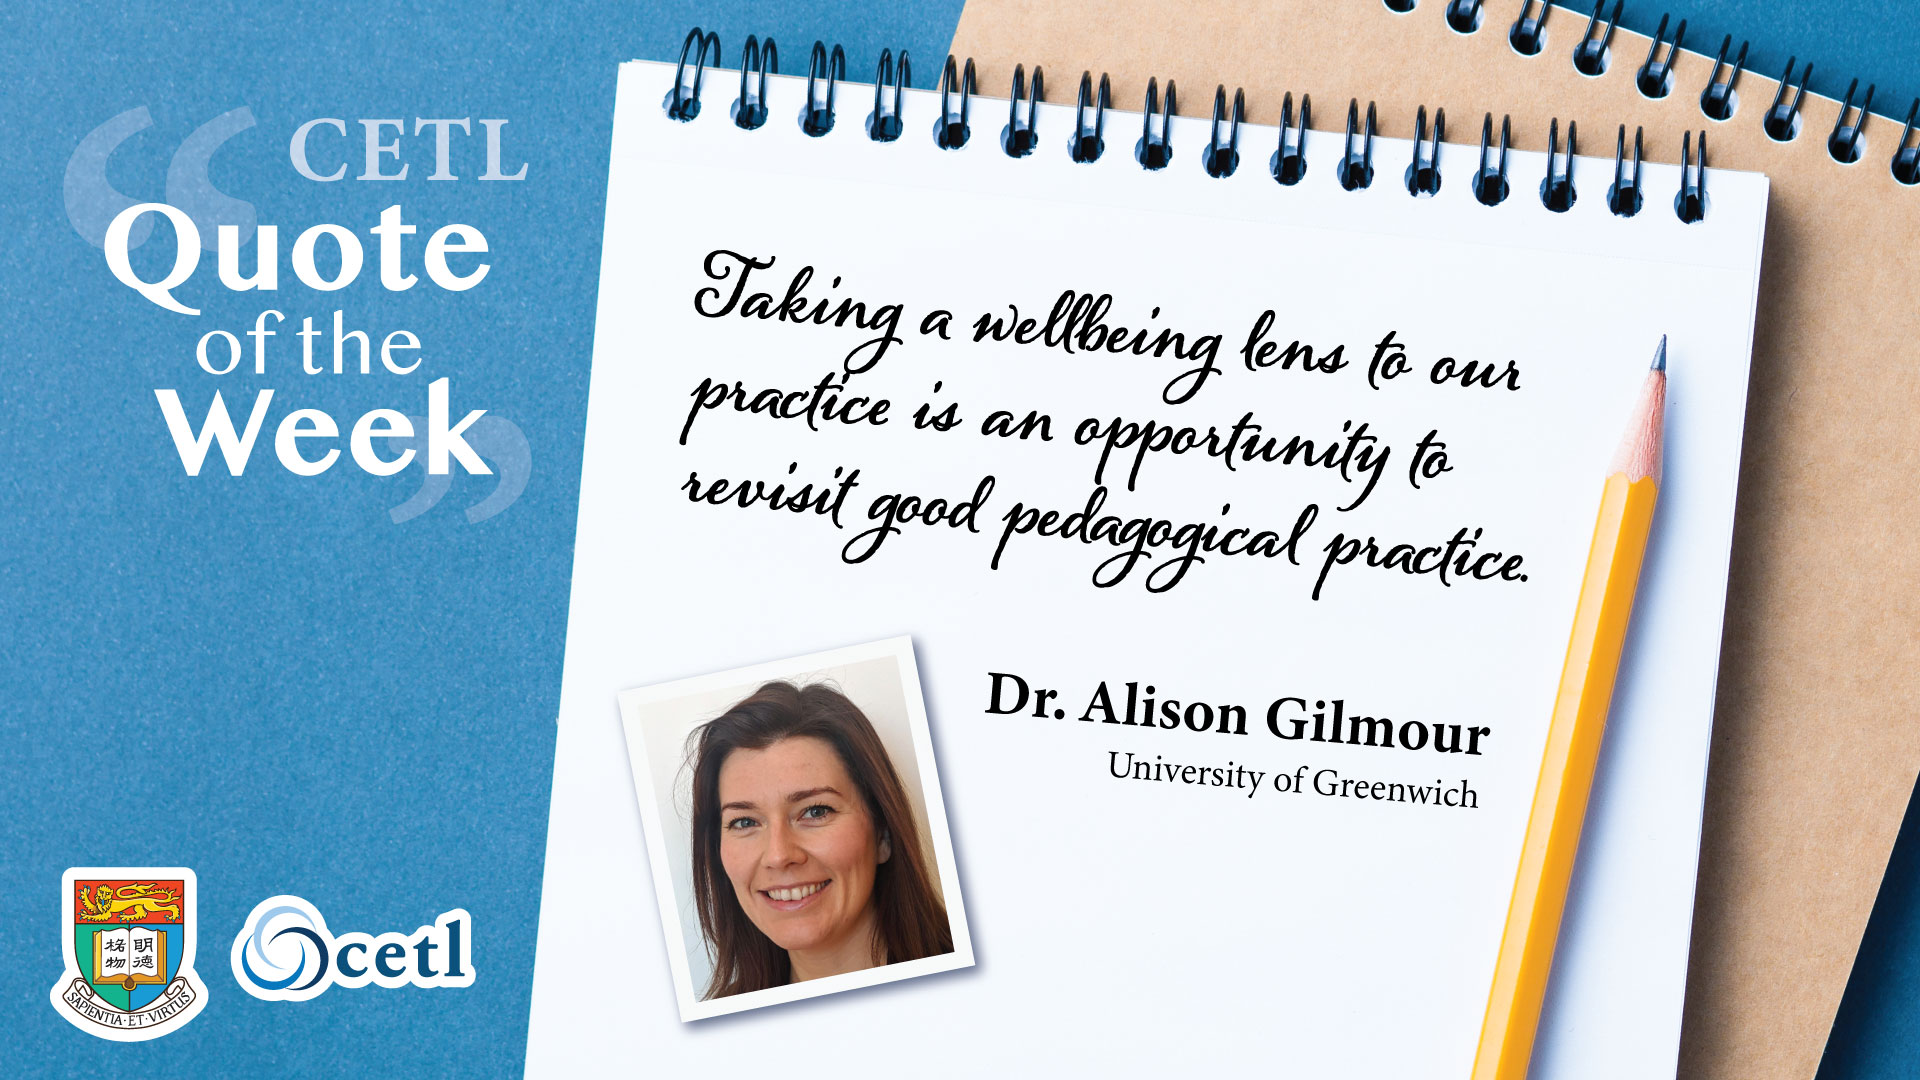 Dr. Alison Gilmour - Taking a wellbeing lens to our practice is an opportunity to revisit good pedagogical practice.